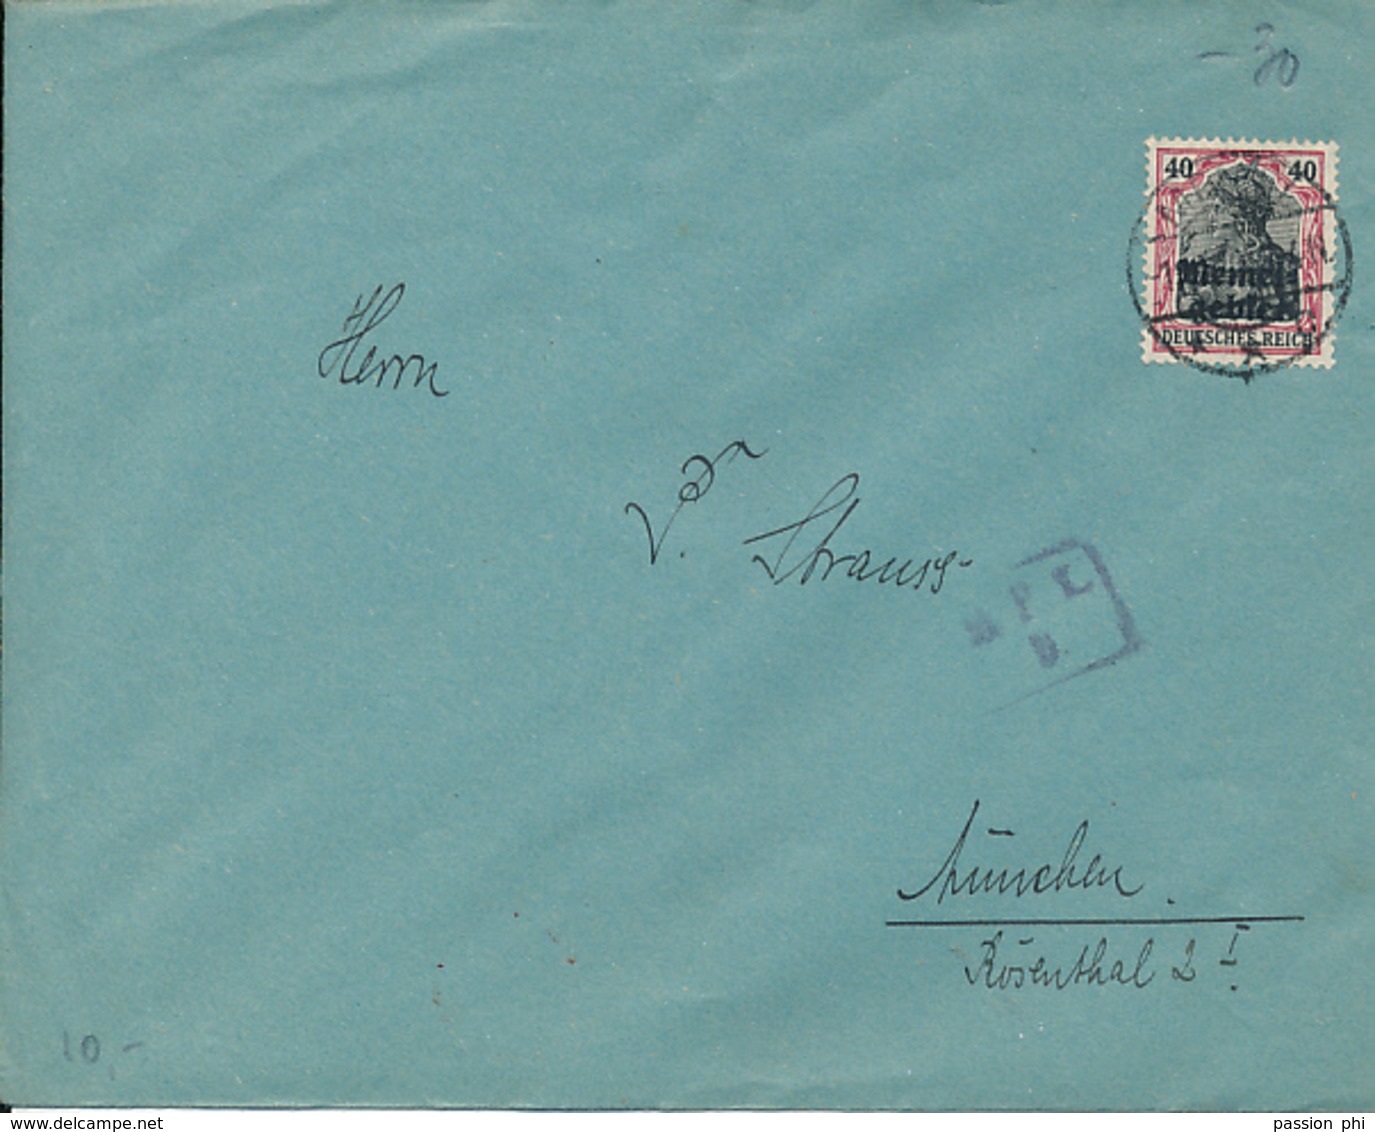 LITHUANIA MEMEL  COVER FROM MEMEL 1920 TO MUNCHEN - Covers & Documents